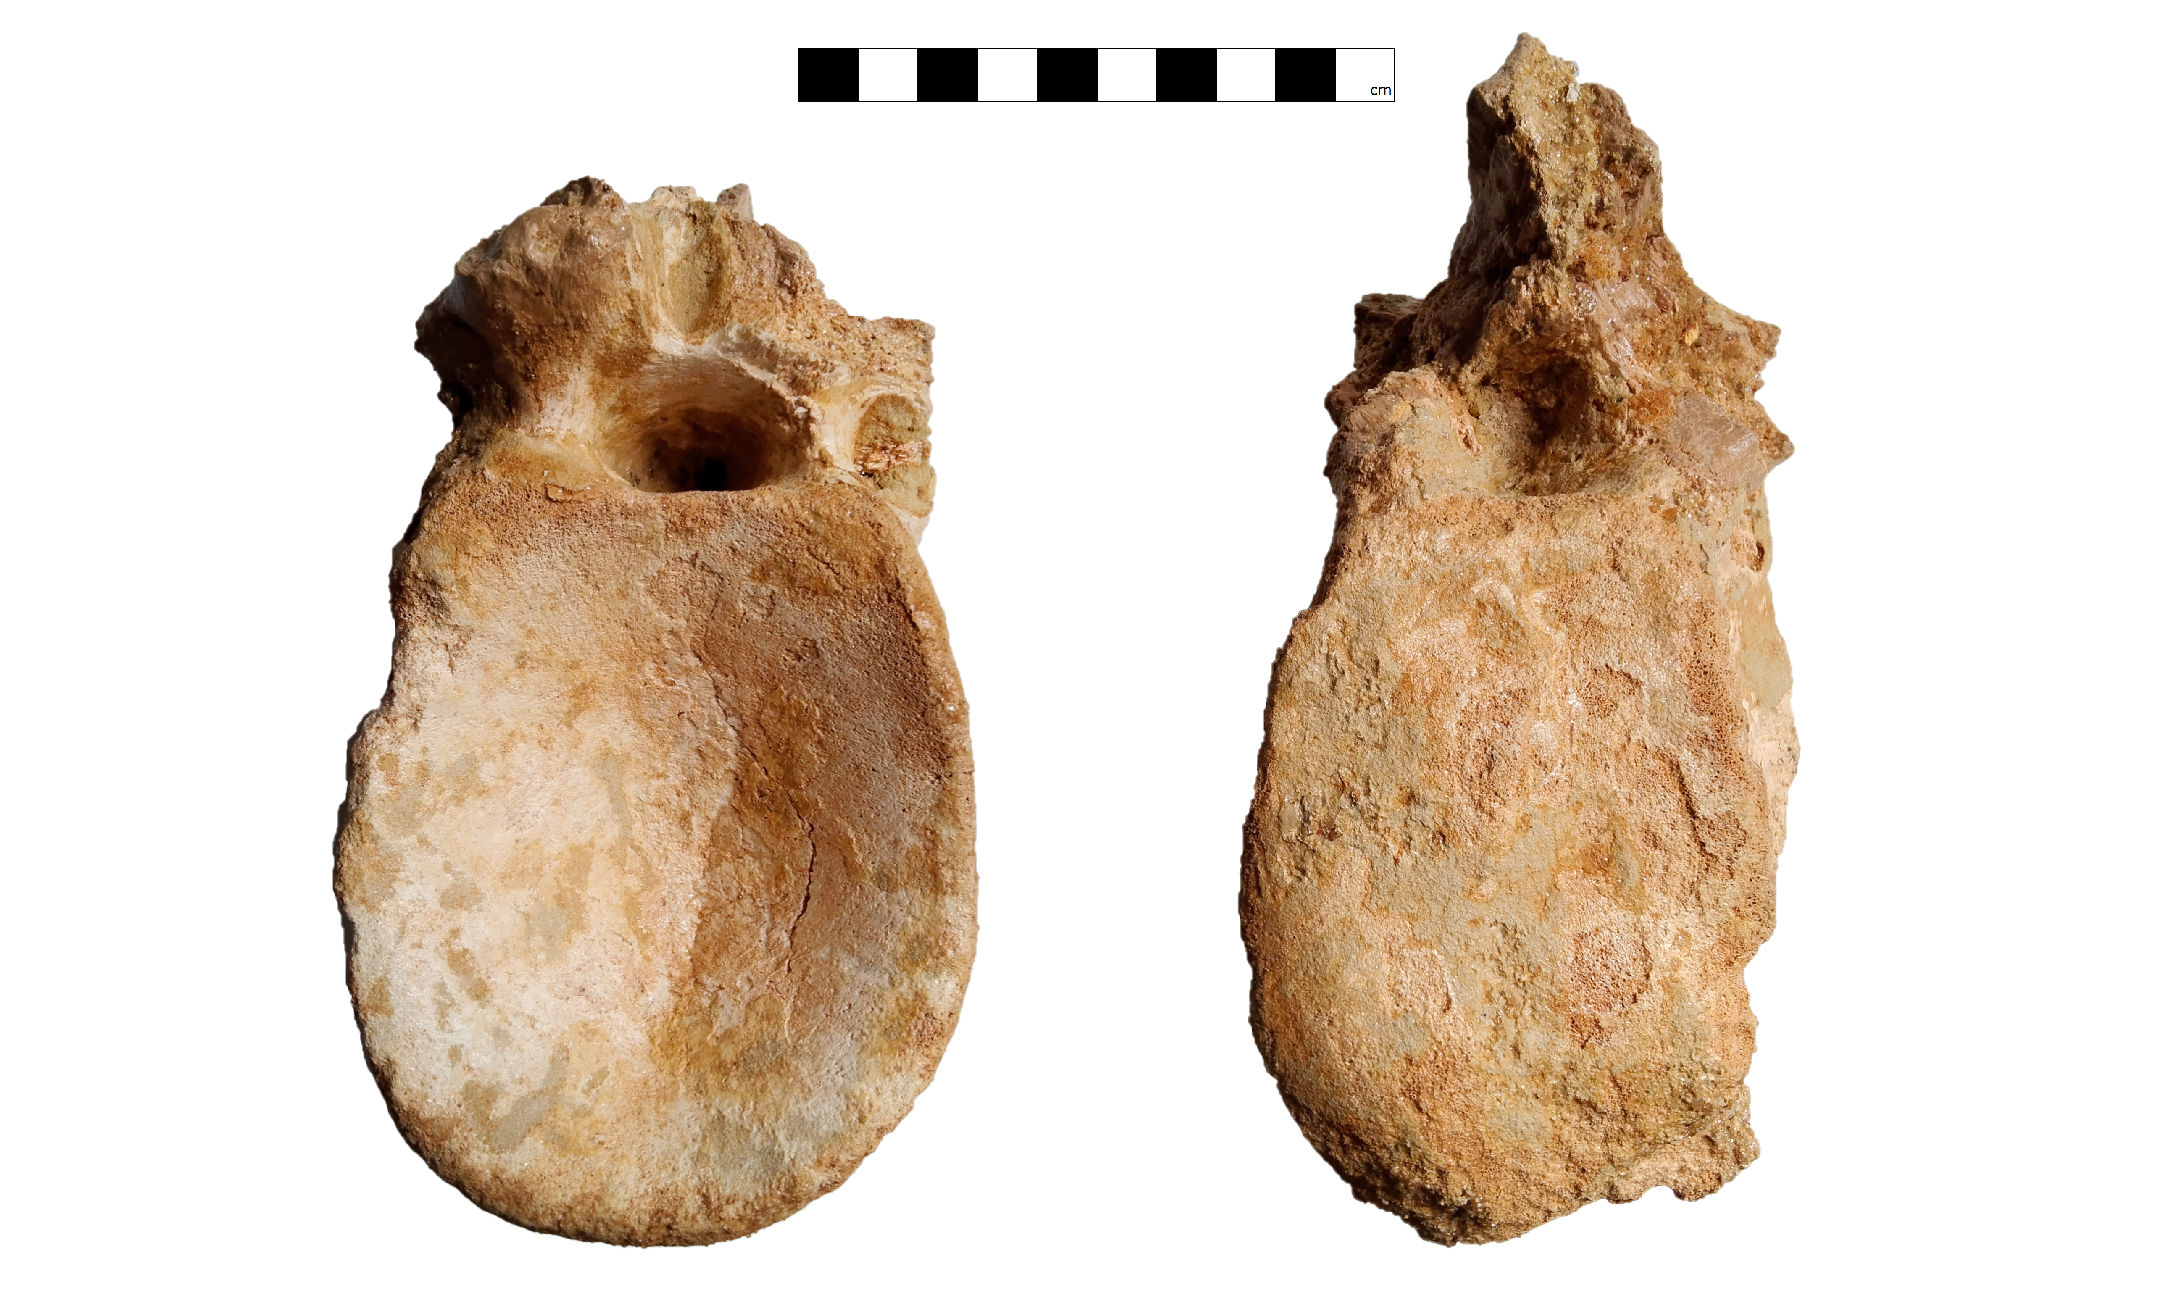 Proximal caudal vertebra (GCE2104146785) of Spinosaurid tentatively refer as Spinosaurus dorsojuvencus. From left image: anterior view (front view); Right image: posterior view (backside view)